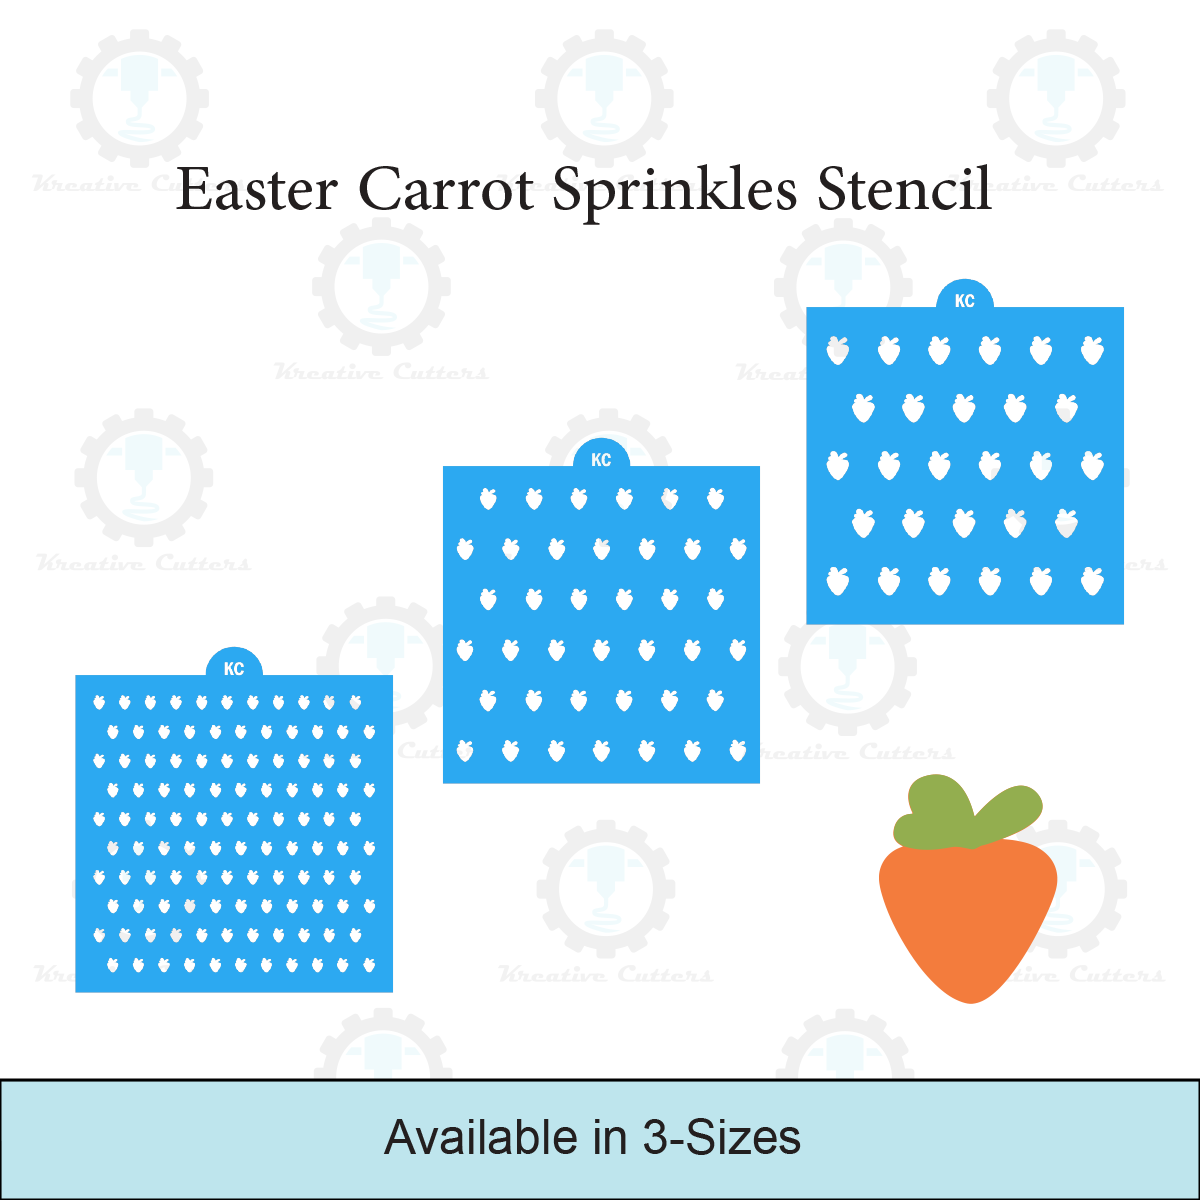 Easter Carrot Stencil Sprinkles Stencil | 3D Printed, Cookie, Cake, & Cupcake, Decorating Stencils